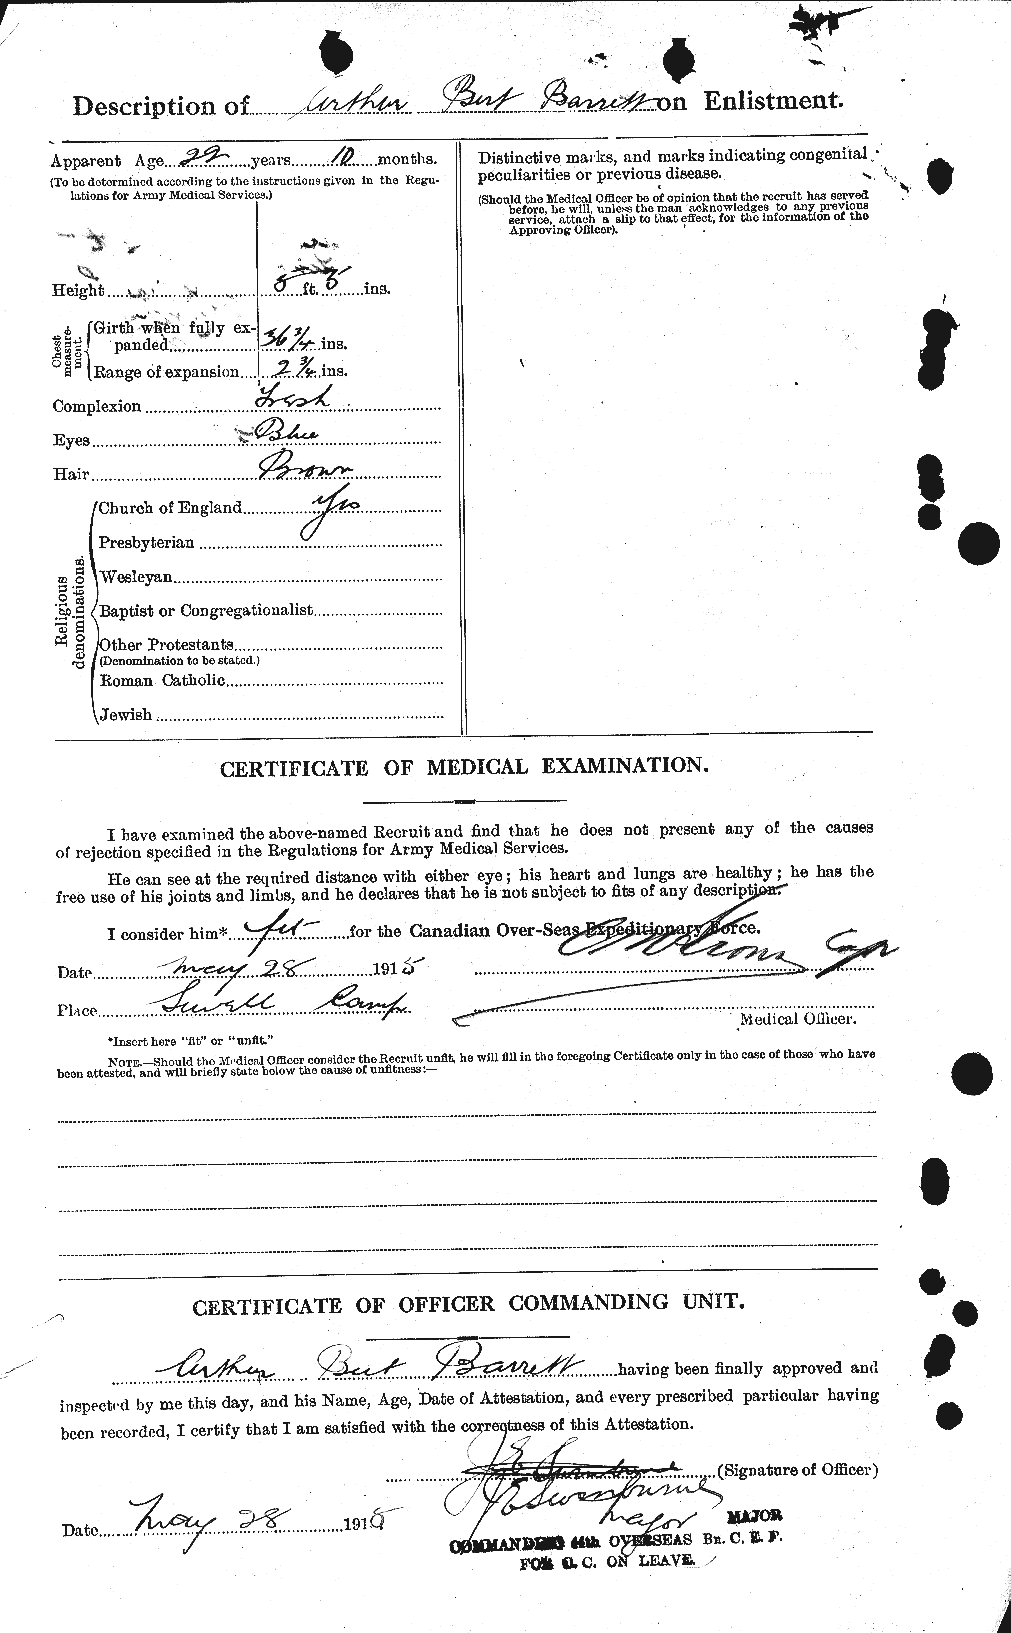 Personnel Records of the First World War - CEF 222247b